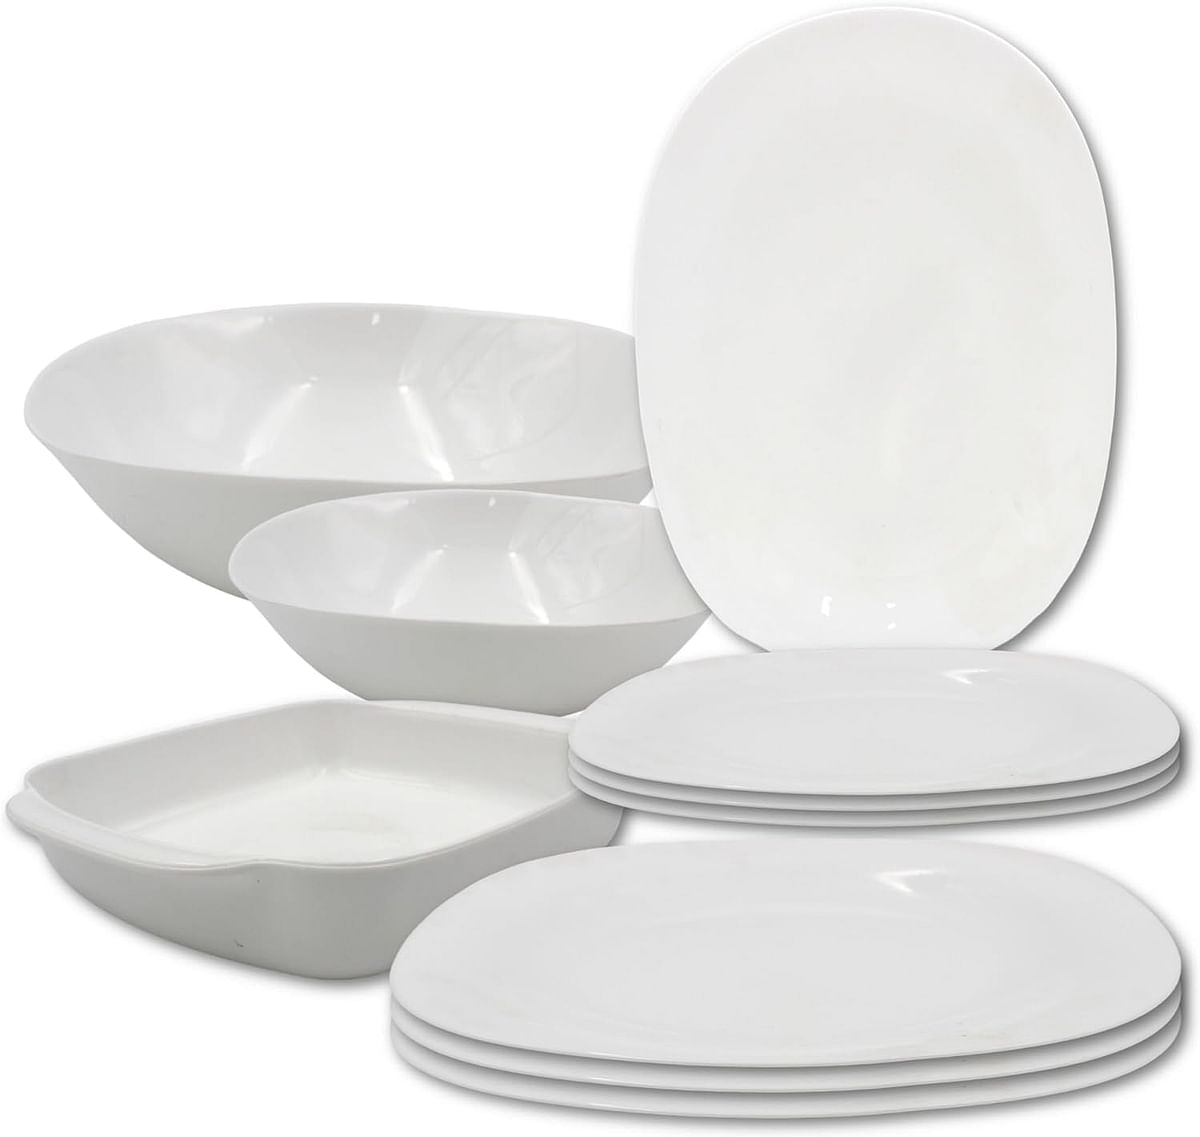 Danny home Opalware Portable 10 Pcs Dinnerware set Dinner plate, Soup plate, Salad bowl, Serving bowl, Serving Plate, Grill Tray Eco-friendly Safe to use, Dishwasher safe (Round Oval)